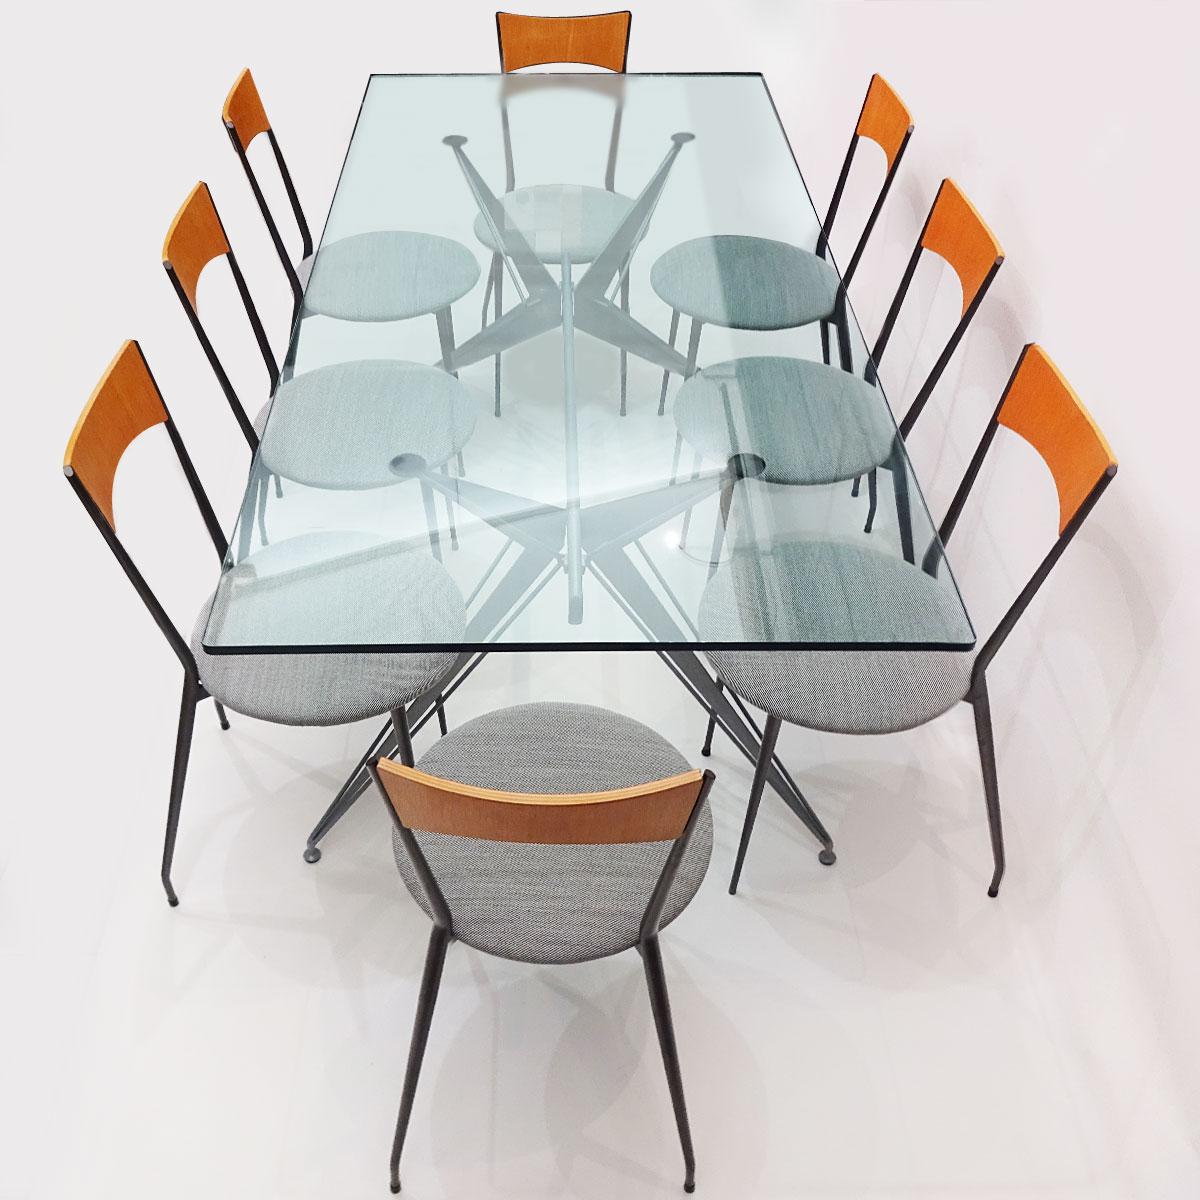 Italian Classic Vintage 1980s Retro Conran Dining Set in Glass, Metal and Fabric